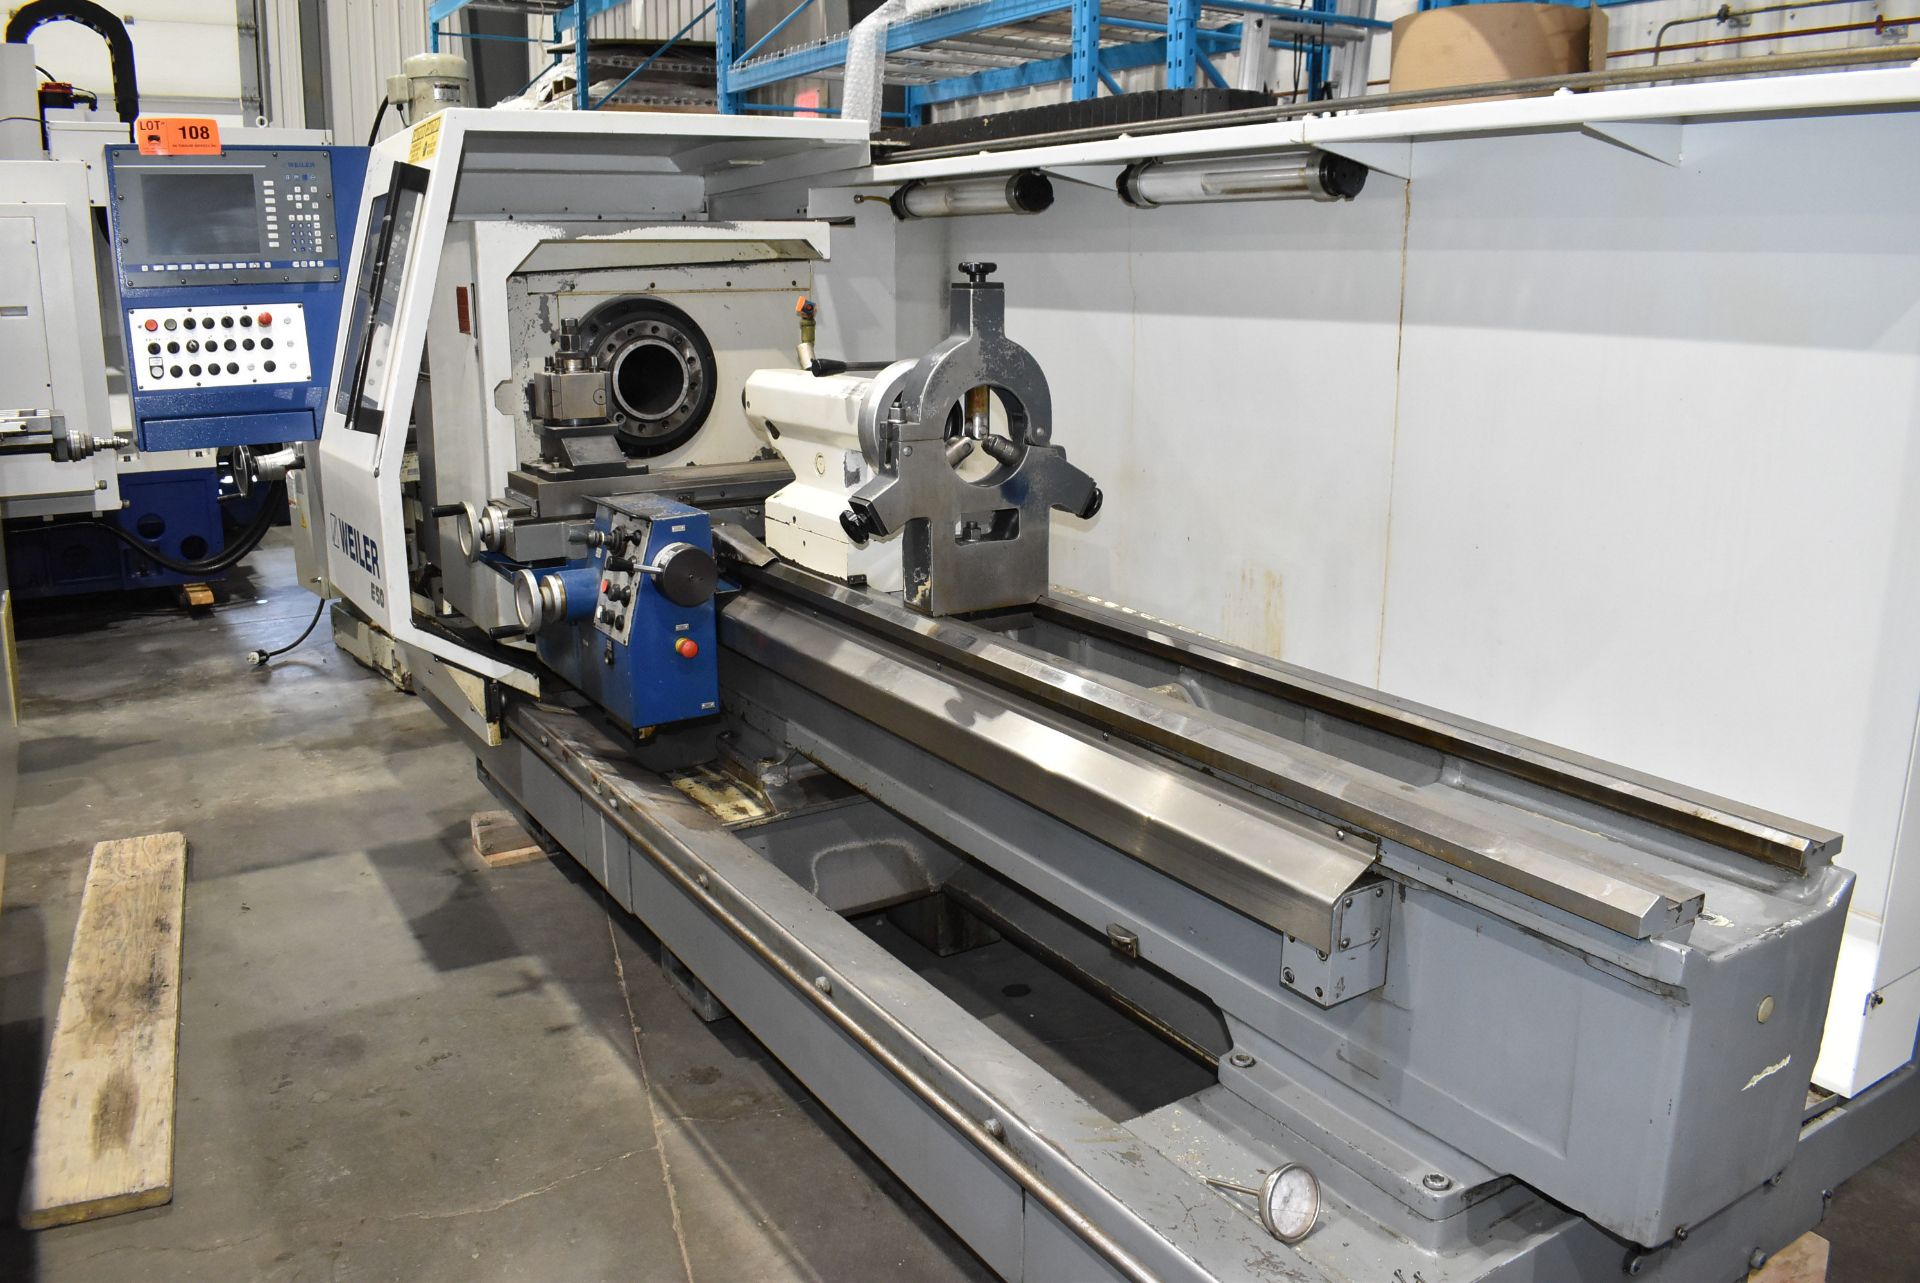 WEILER (2013) E50X2000-165 CNC LATHE WITH WEILER CNC CONTROL, 4-JAW CHUCK, 22.44" SWING OVER BED,